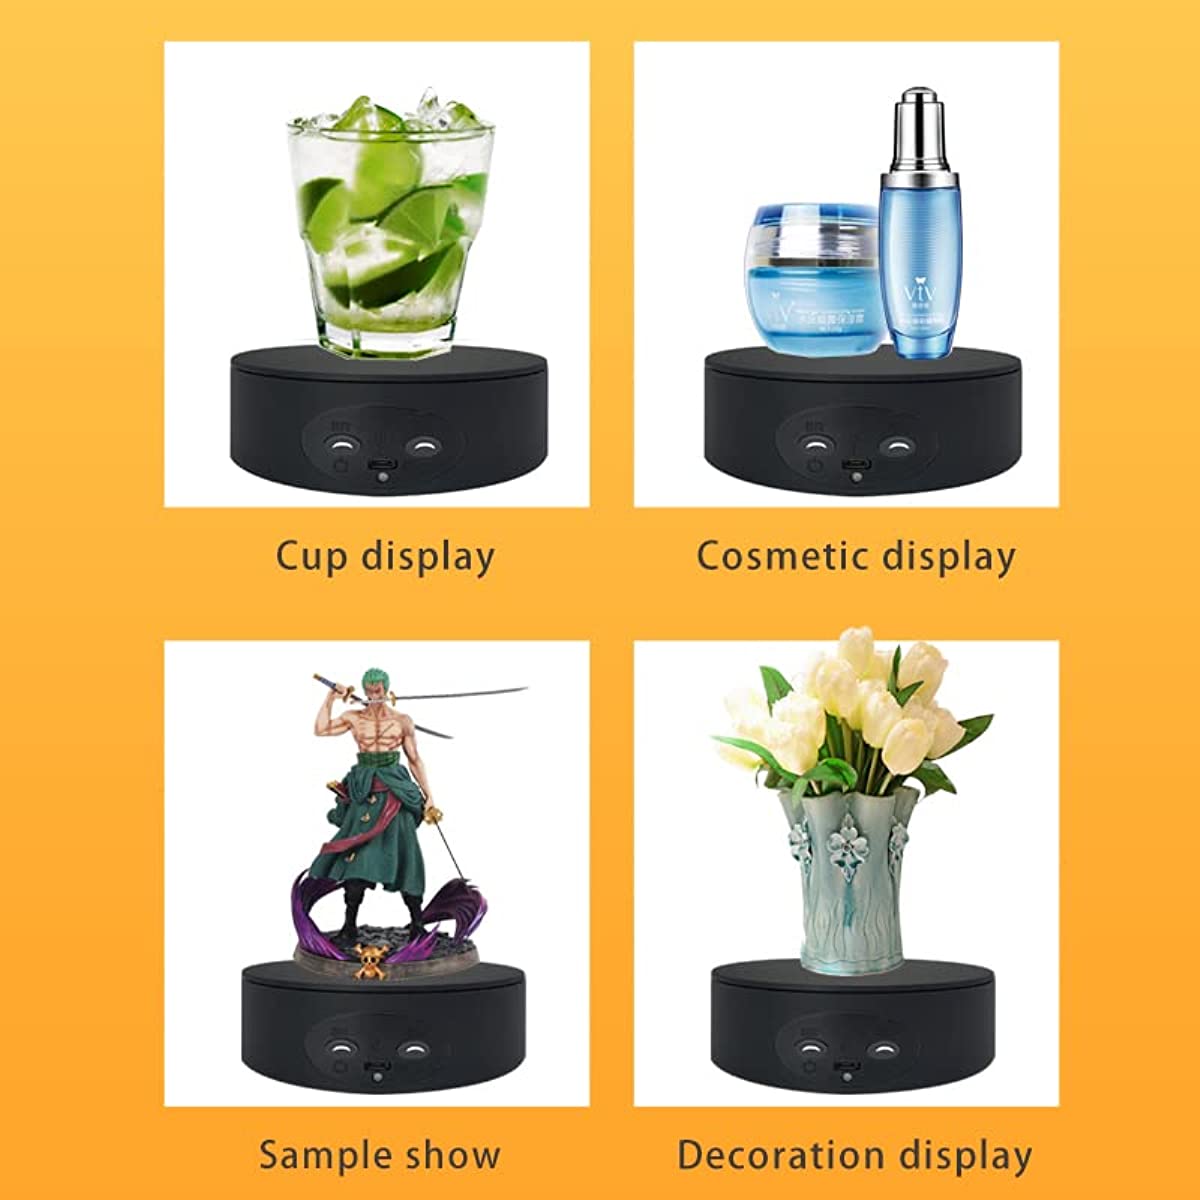 Cup Turner Rotating Display Stand for Tumblers, 360 Degree Turntable